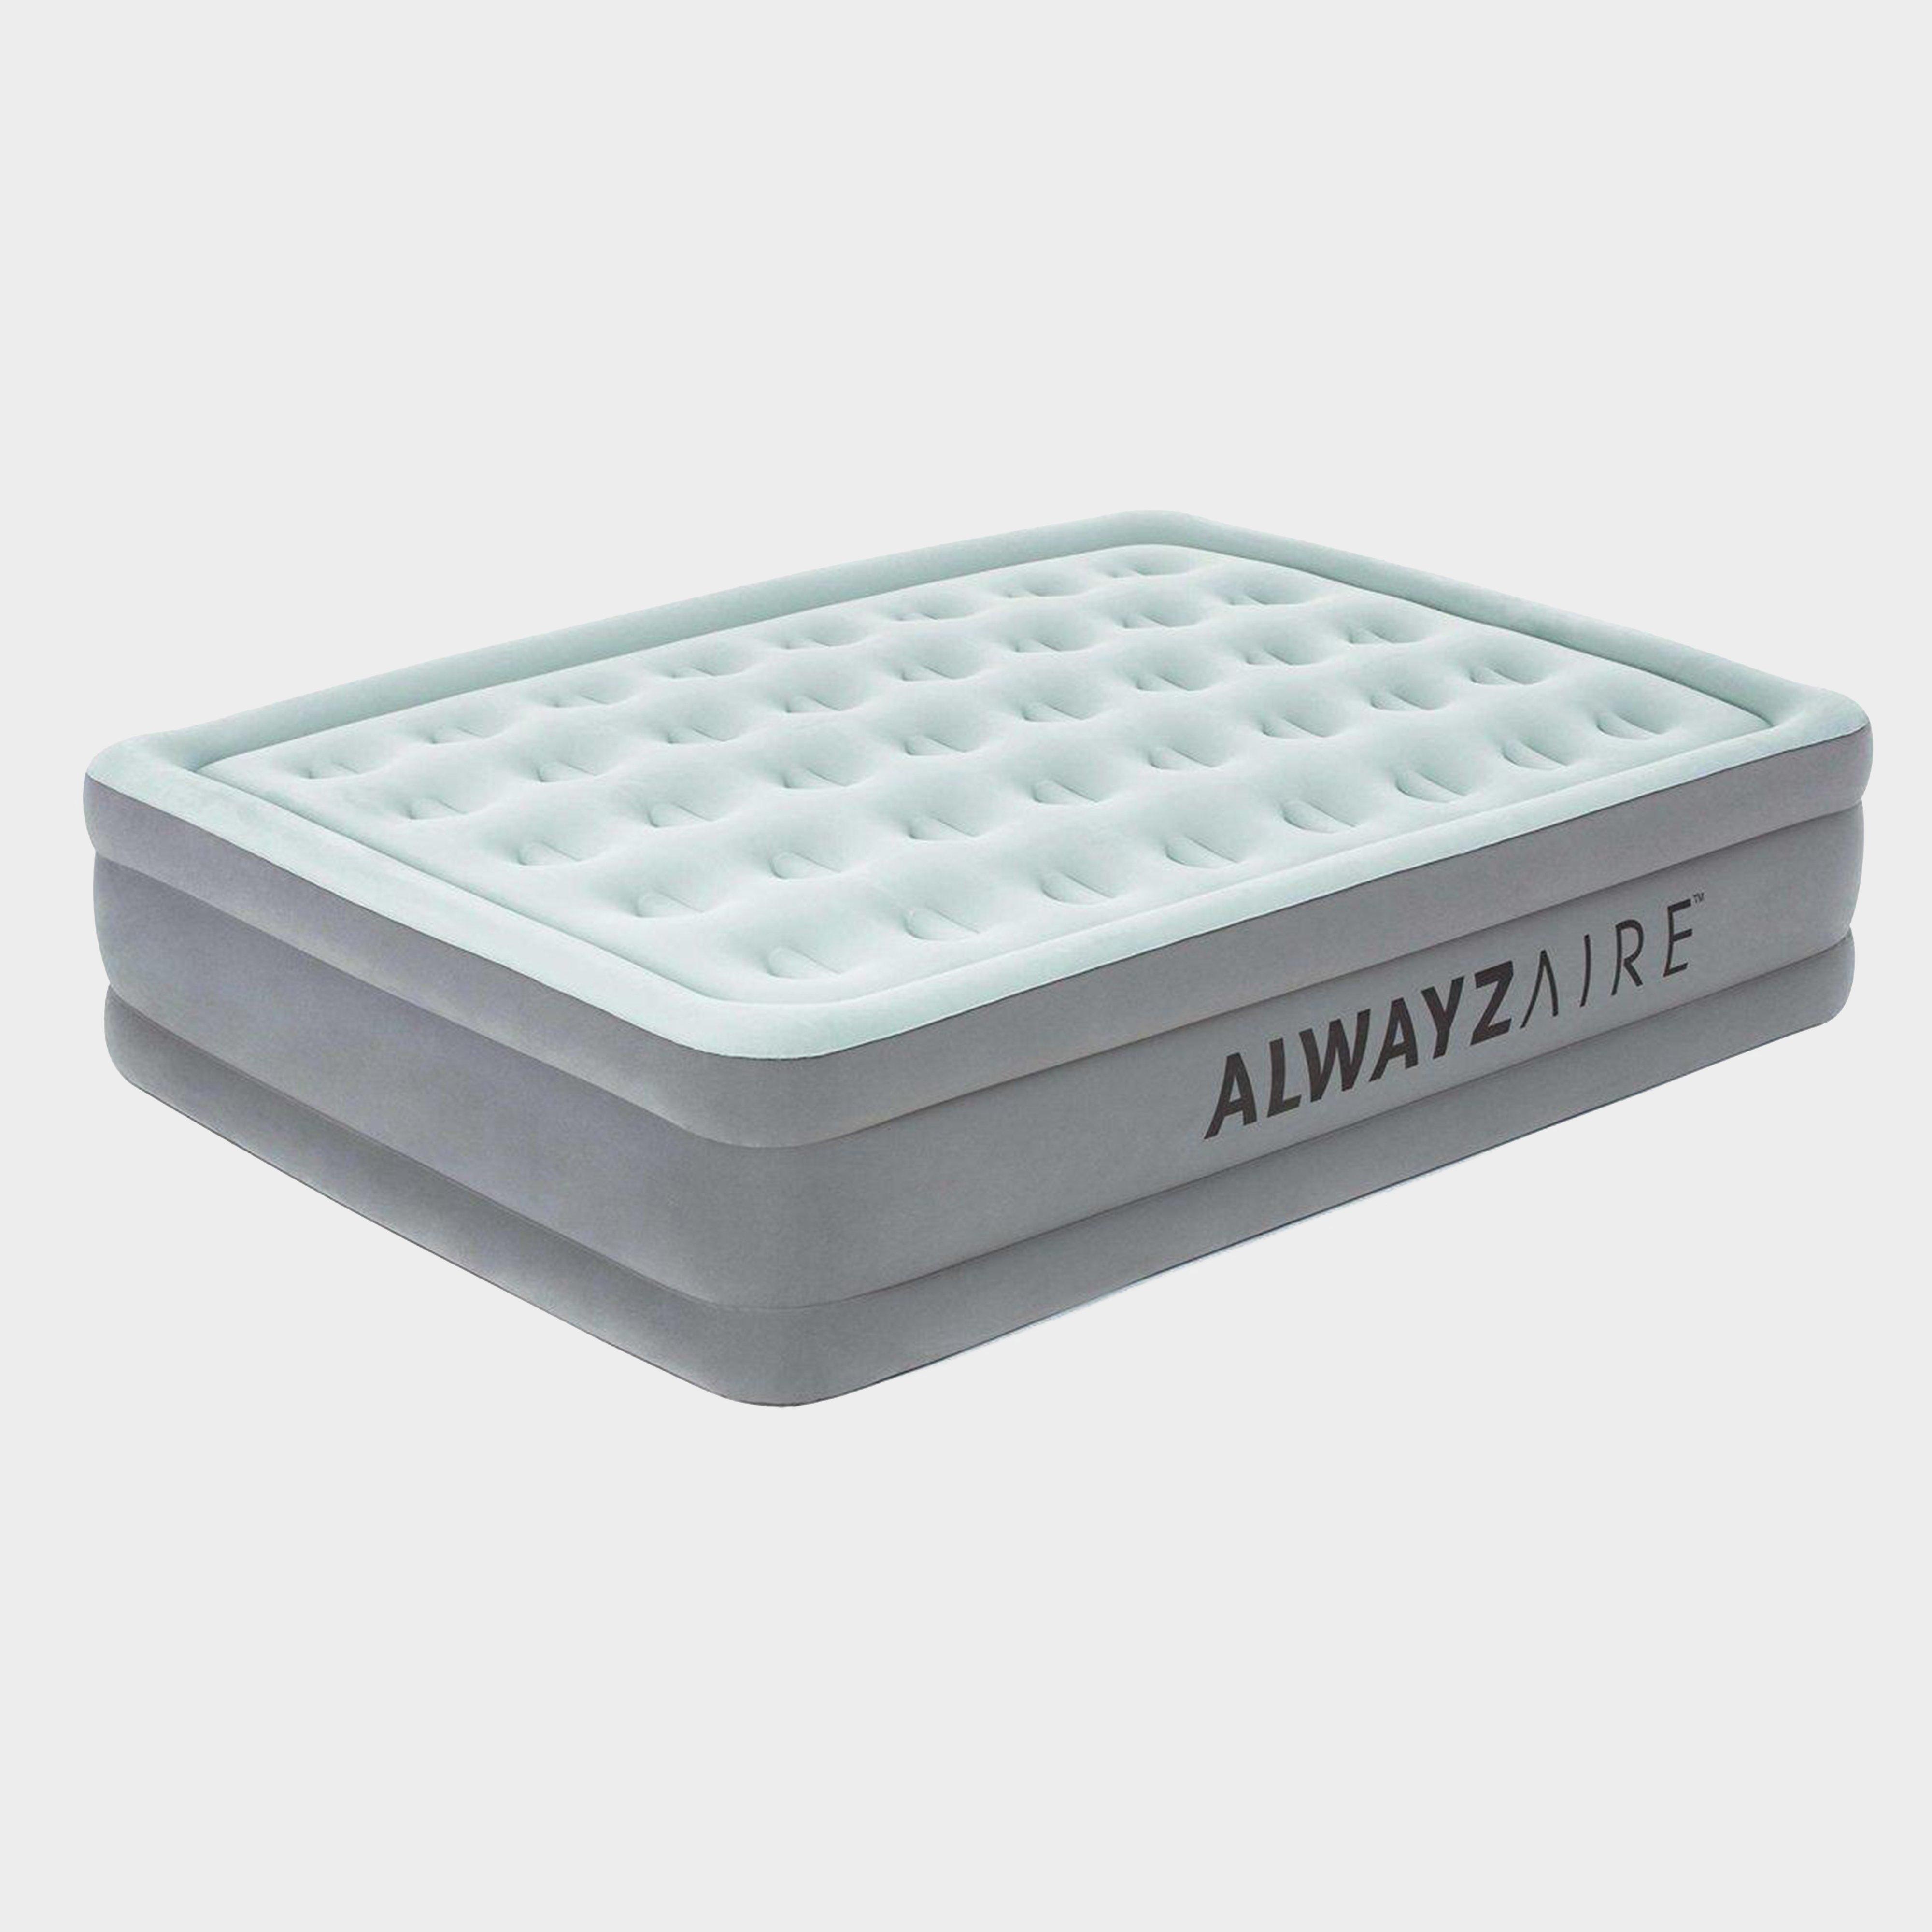  Bestway Alwayzaire Airbed (King Size), White